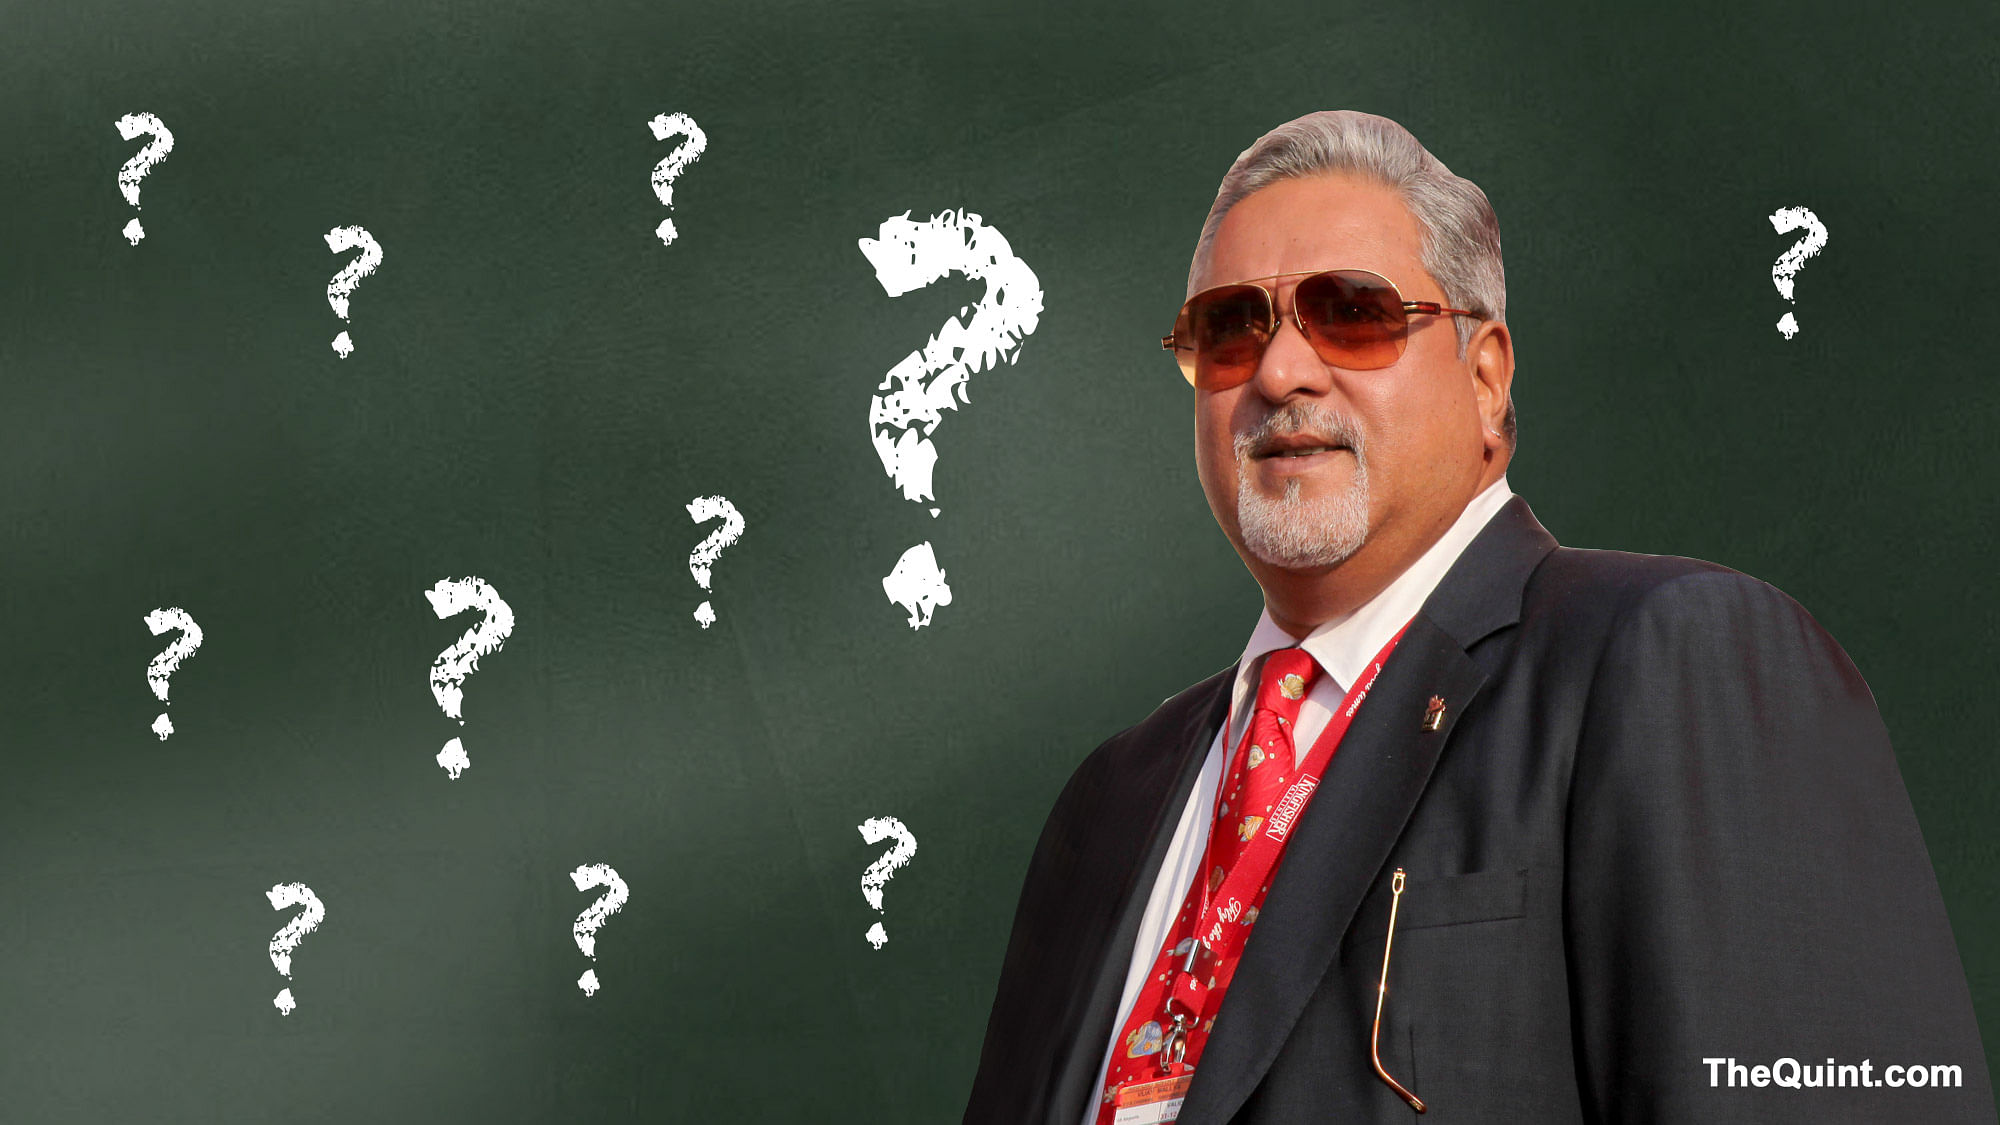 India has asked the UK to deport Mallya; his diplomatic passport was revoked last week. (Photo: <b>The Quint</b>)